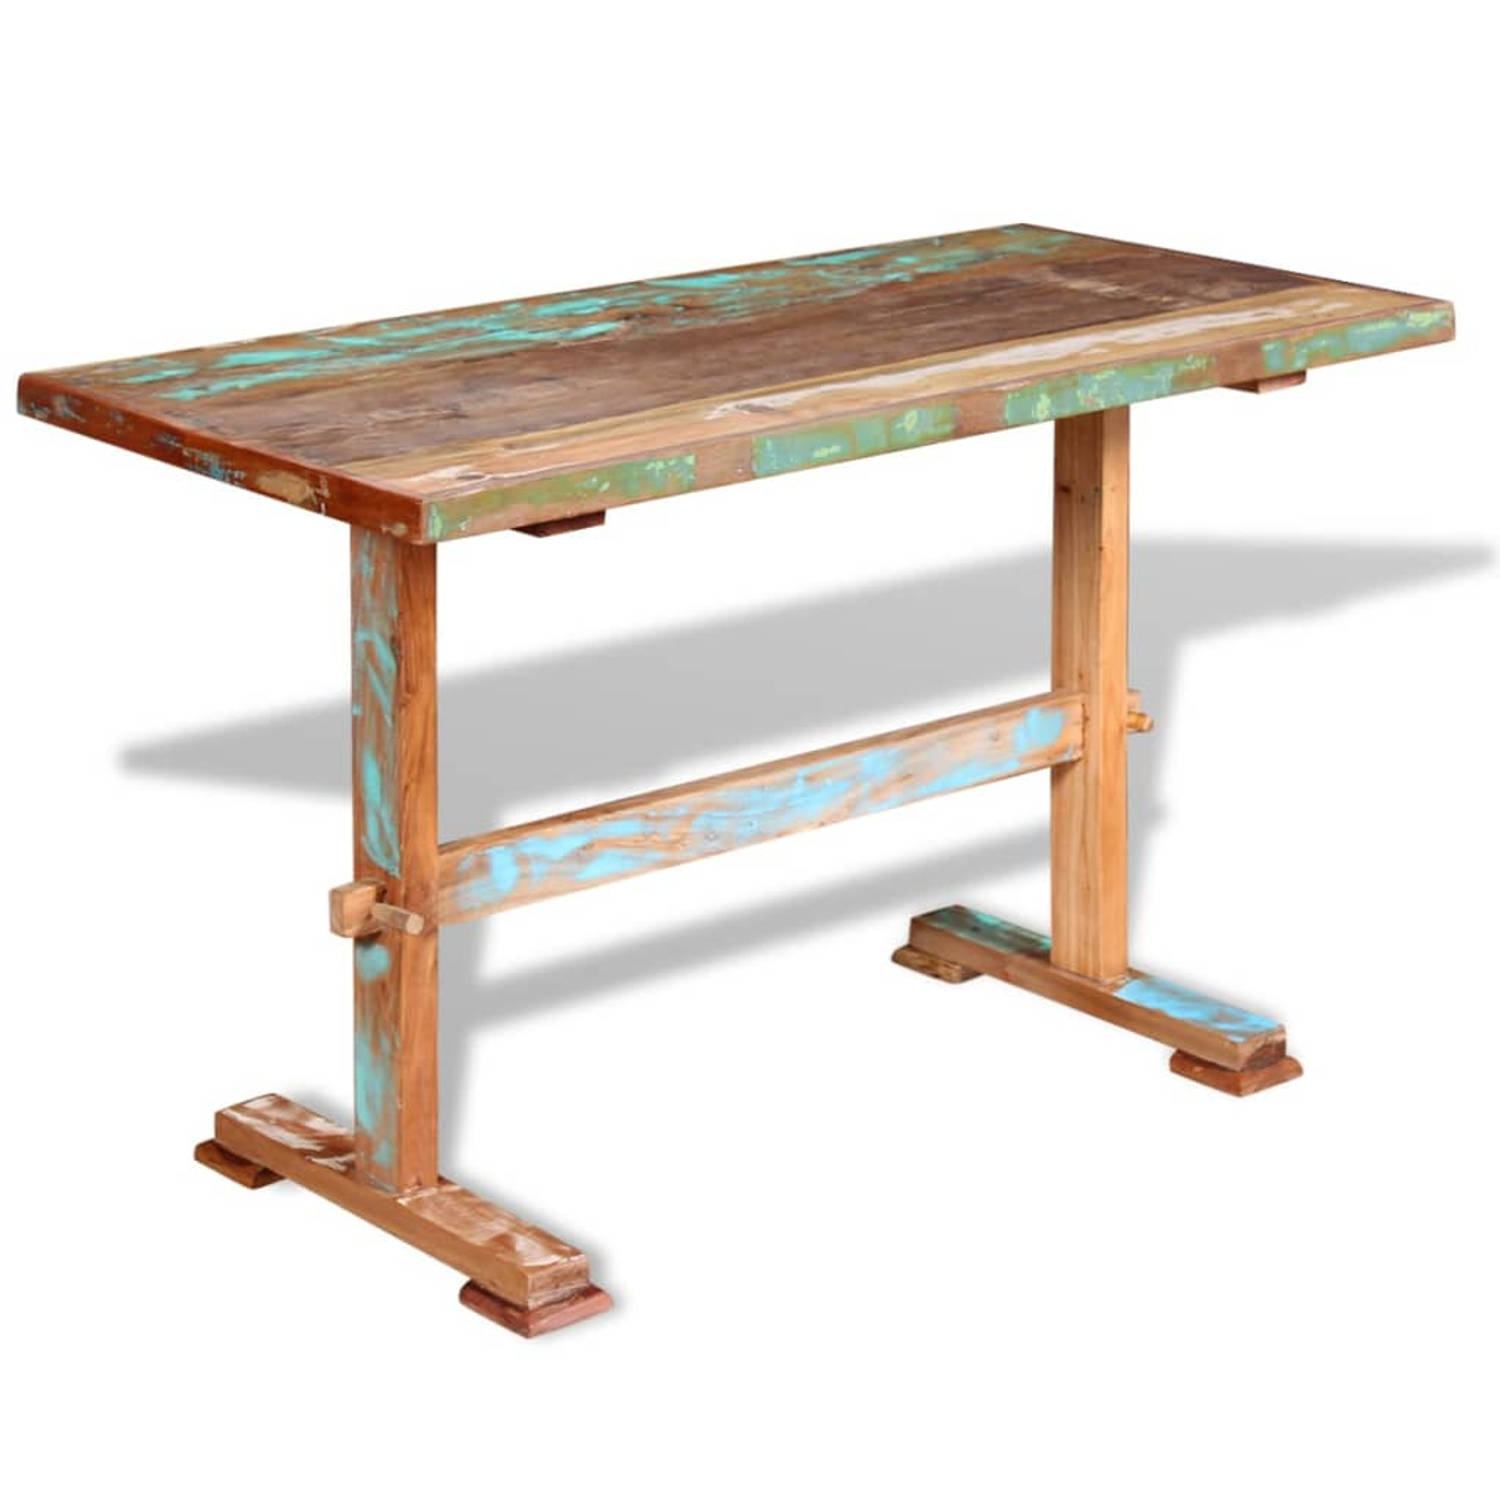 The Living Store Eettafel Vintage - Massief gerecycled hout - 120x58x78 cm - Bruin